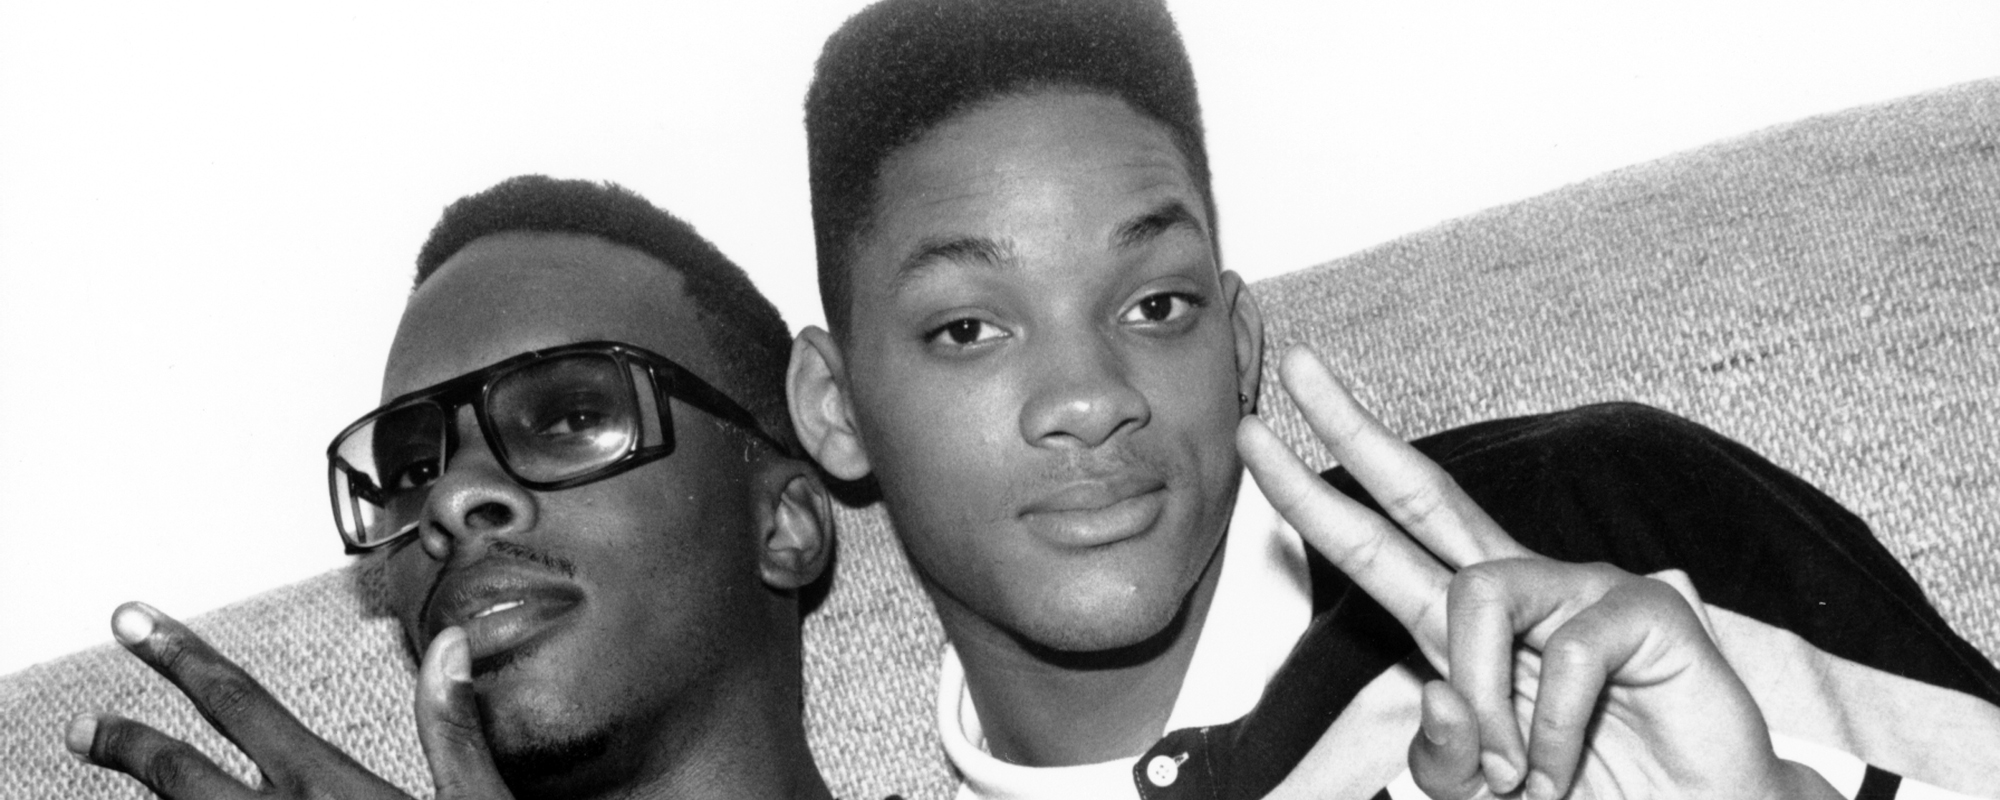 Who Wrote ‘The Fresh Prince of Bel-Air’ Theme Song?